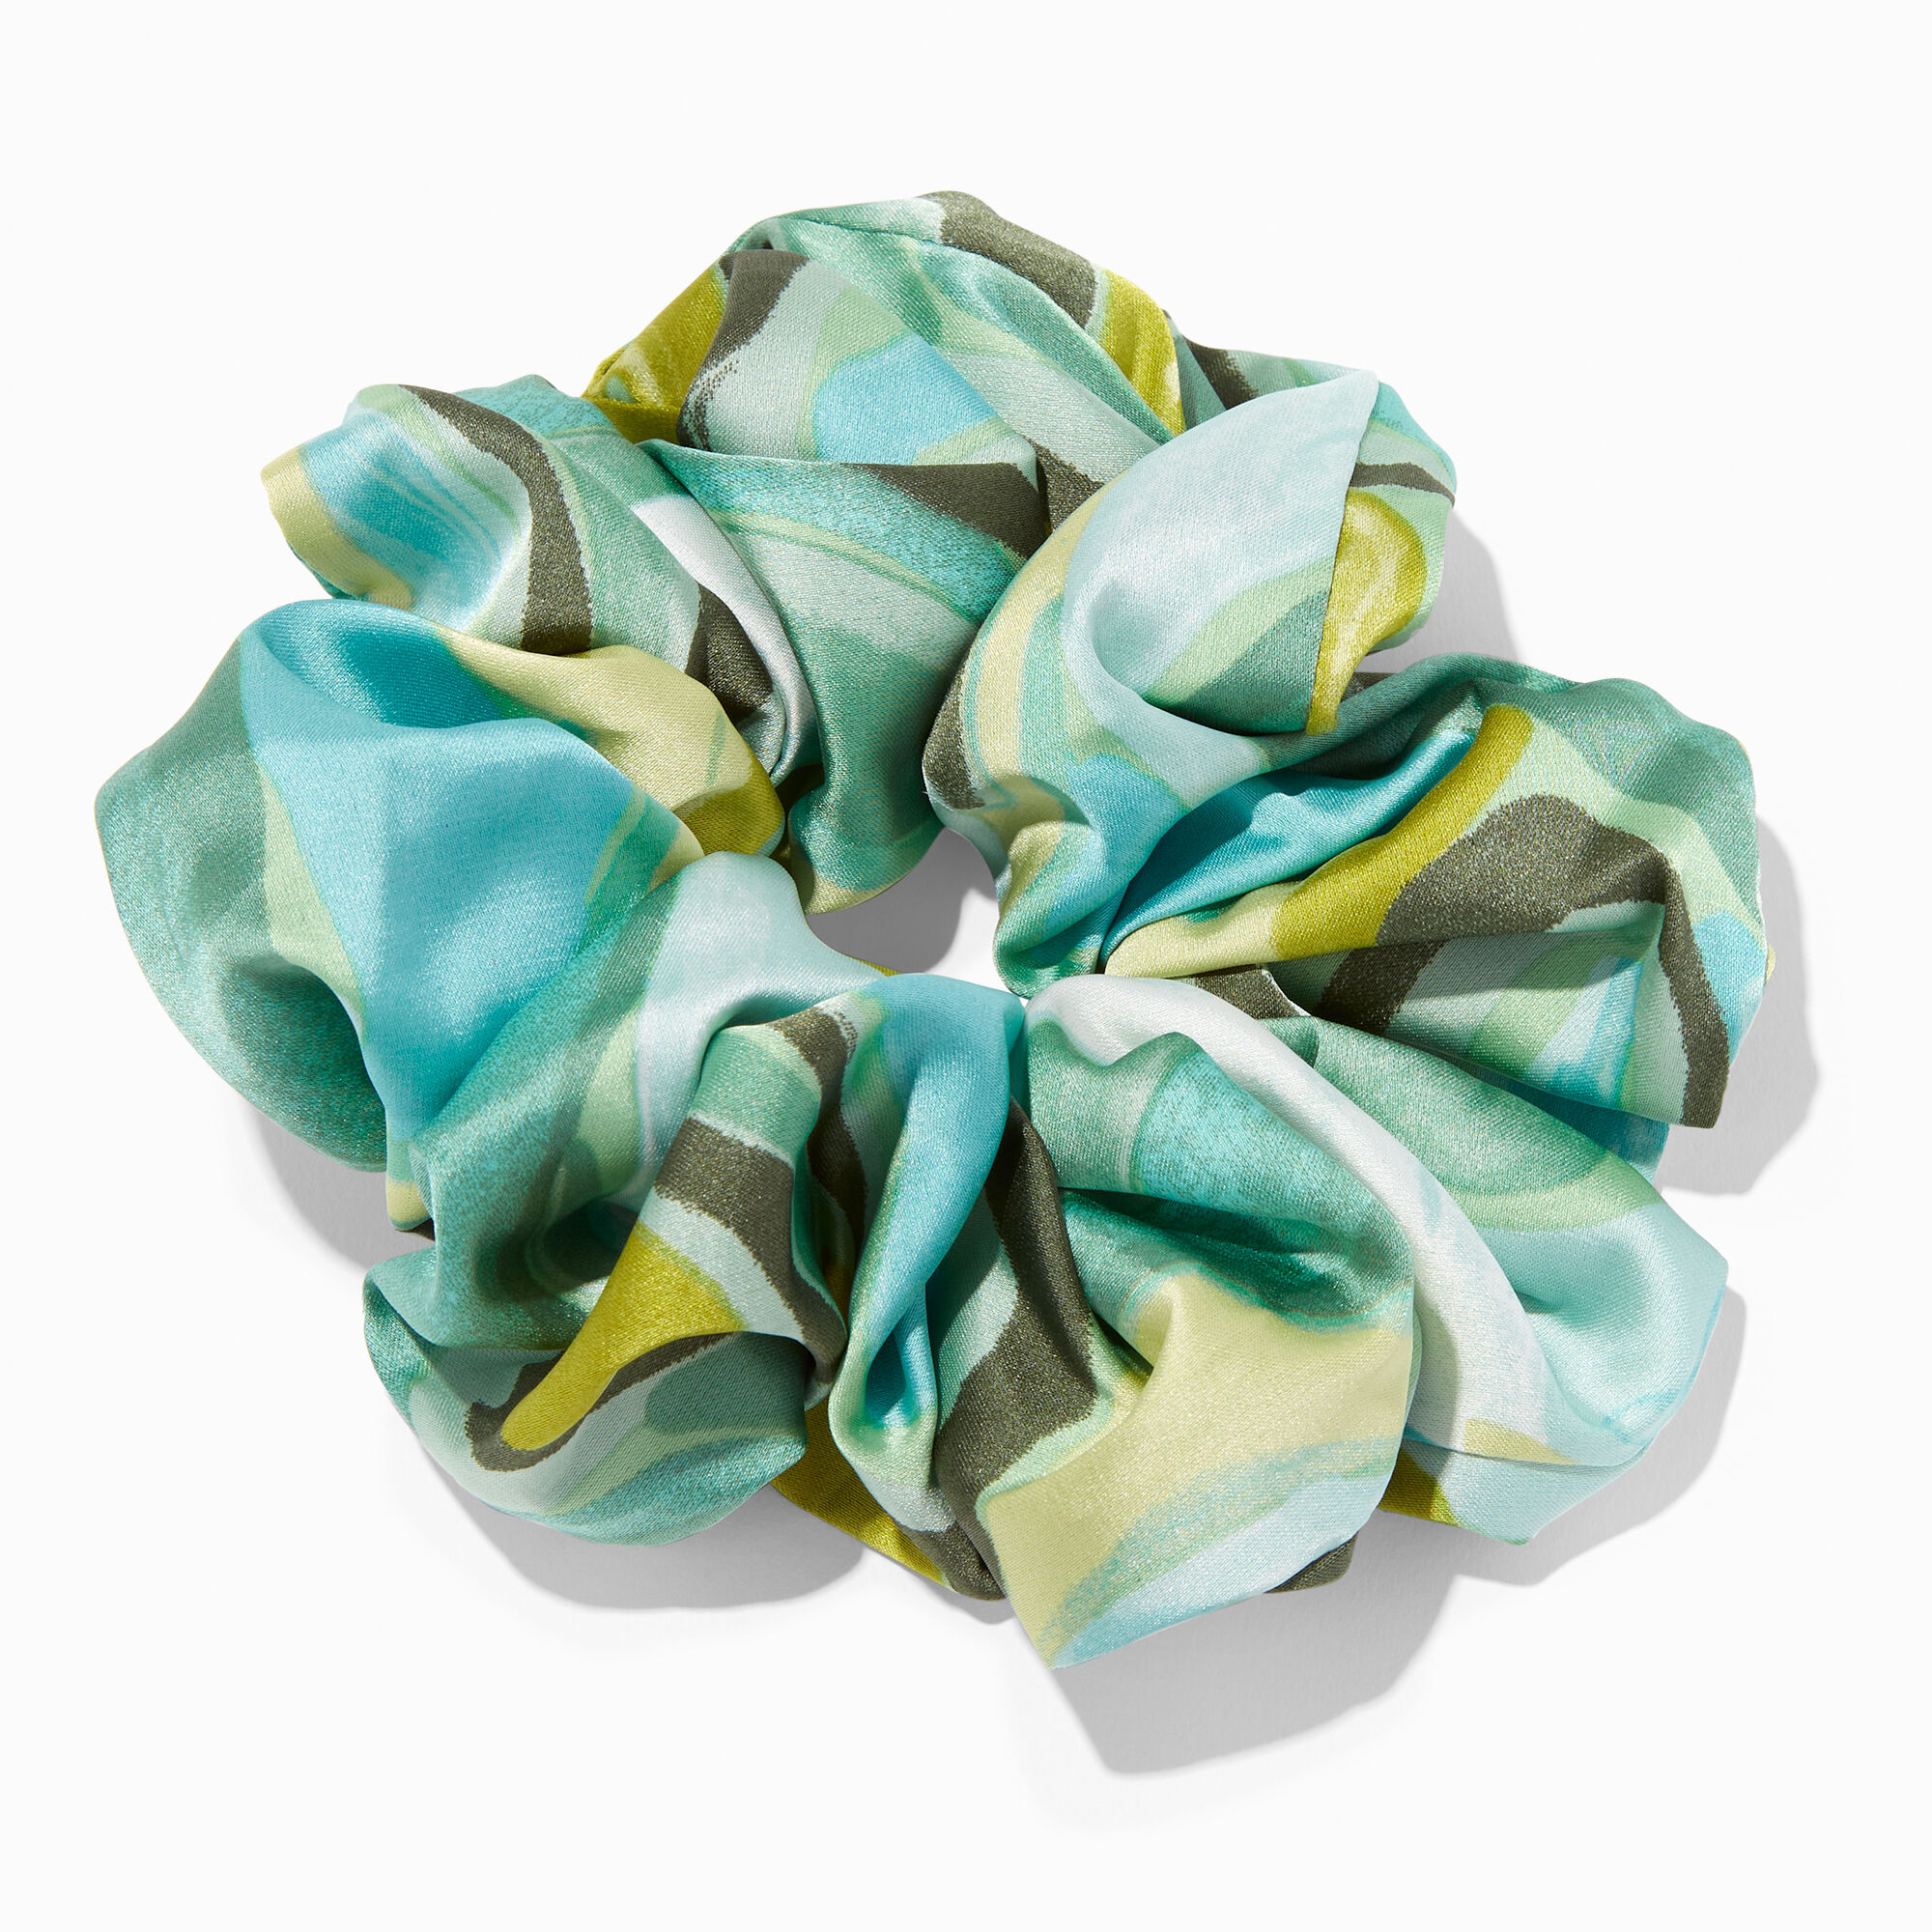 View Claires Giant Swirl Silky Hair Scrunchie Bracelet Green information